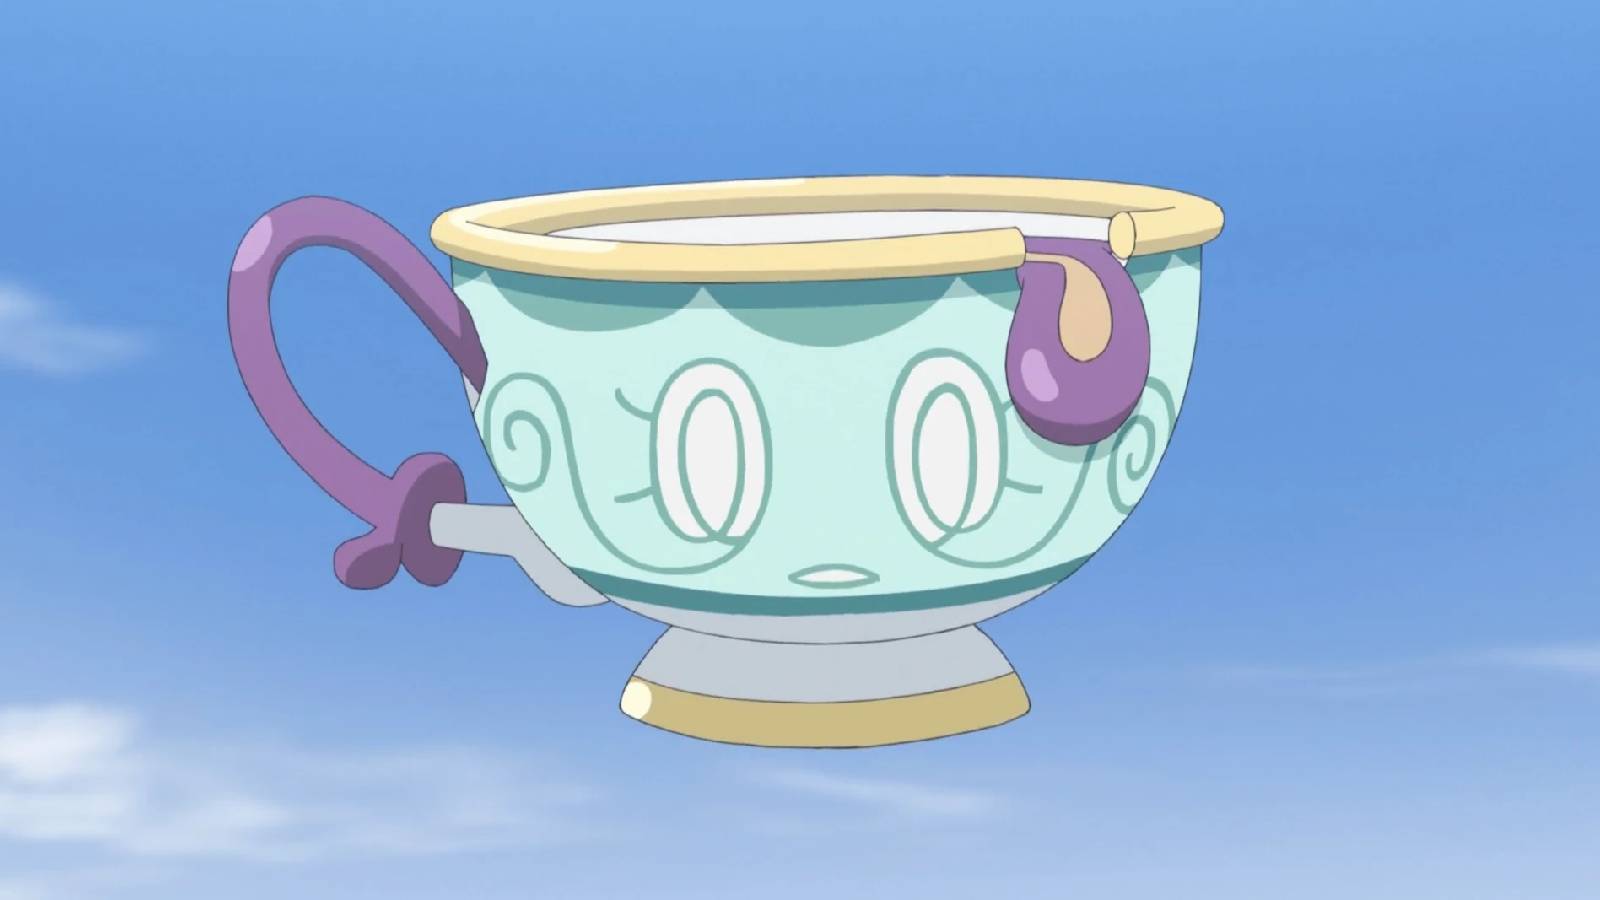 The teacup Pokemon Sinistea floats in the ai, in the background is a blue sky broken slightly with clouds